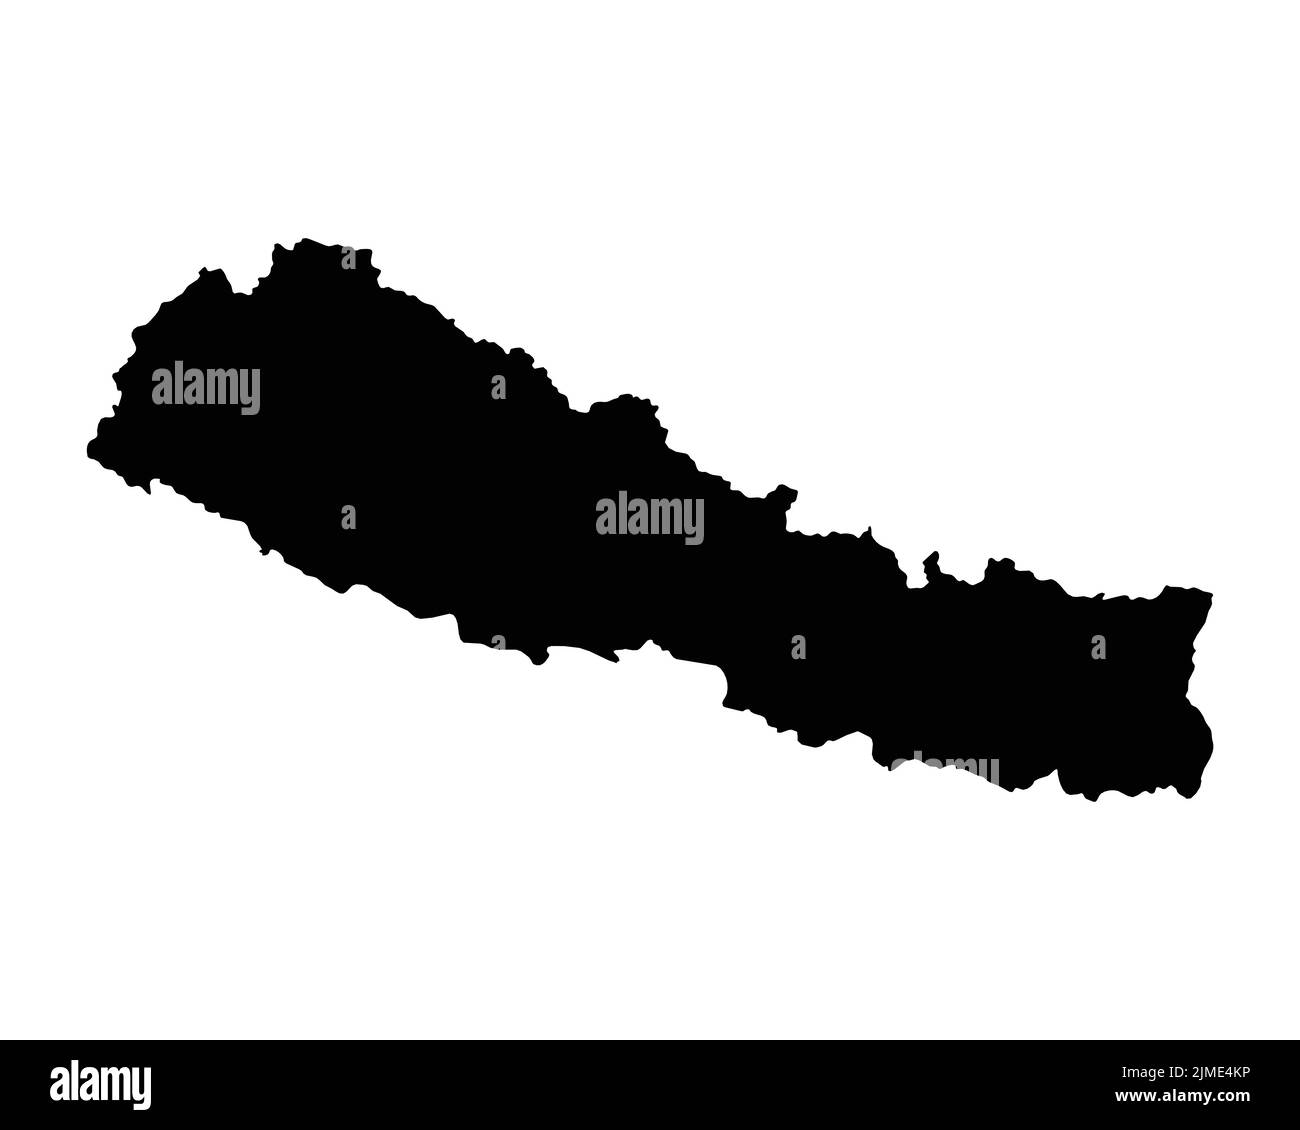 Nepal Map. Nepali Country Map. Black and White Nepalese National Nation Outline Geography Border Boundary Shape Territory Vector Illustration EPS Clip Stock Vector